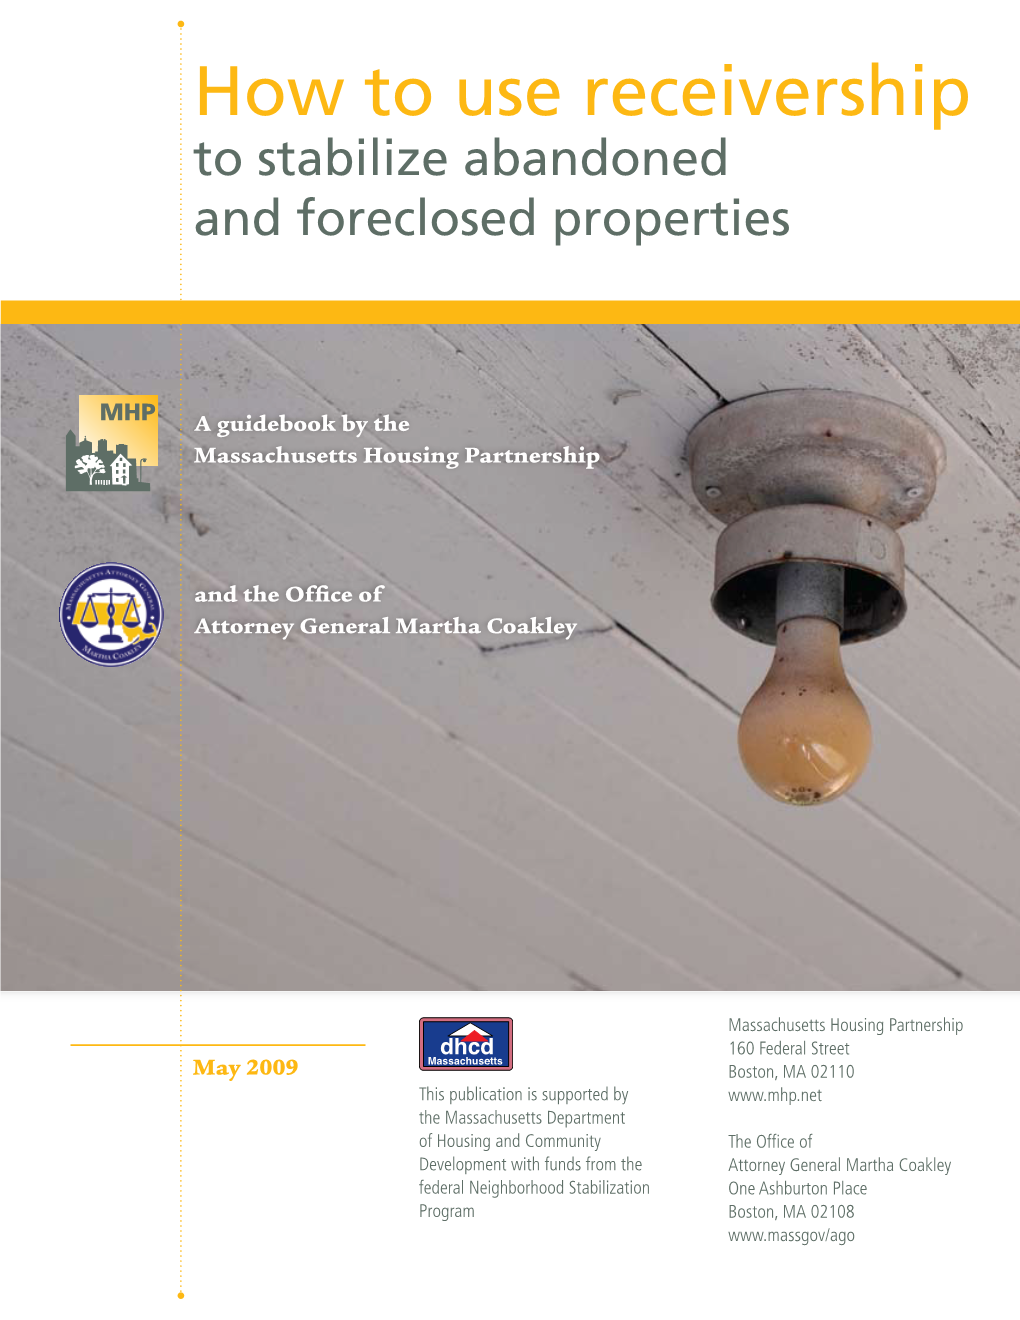 How to Use Receivership to Stabilize Abandoned and Foreclosed Properties